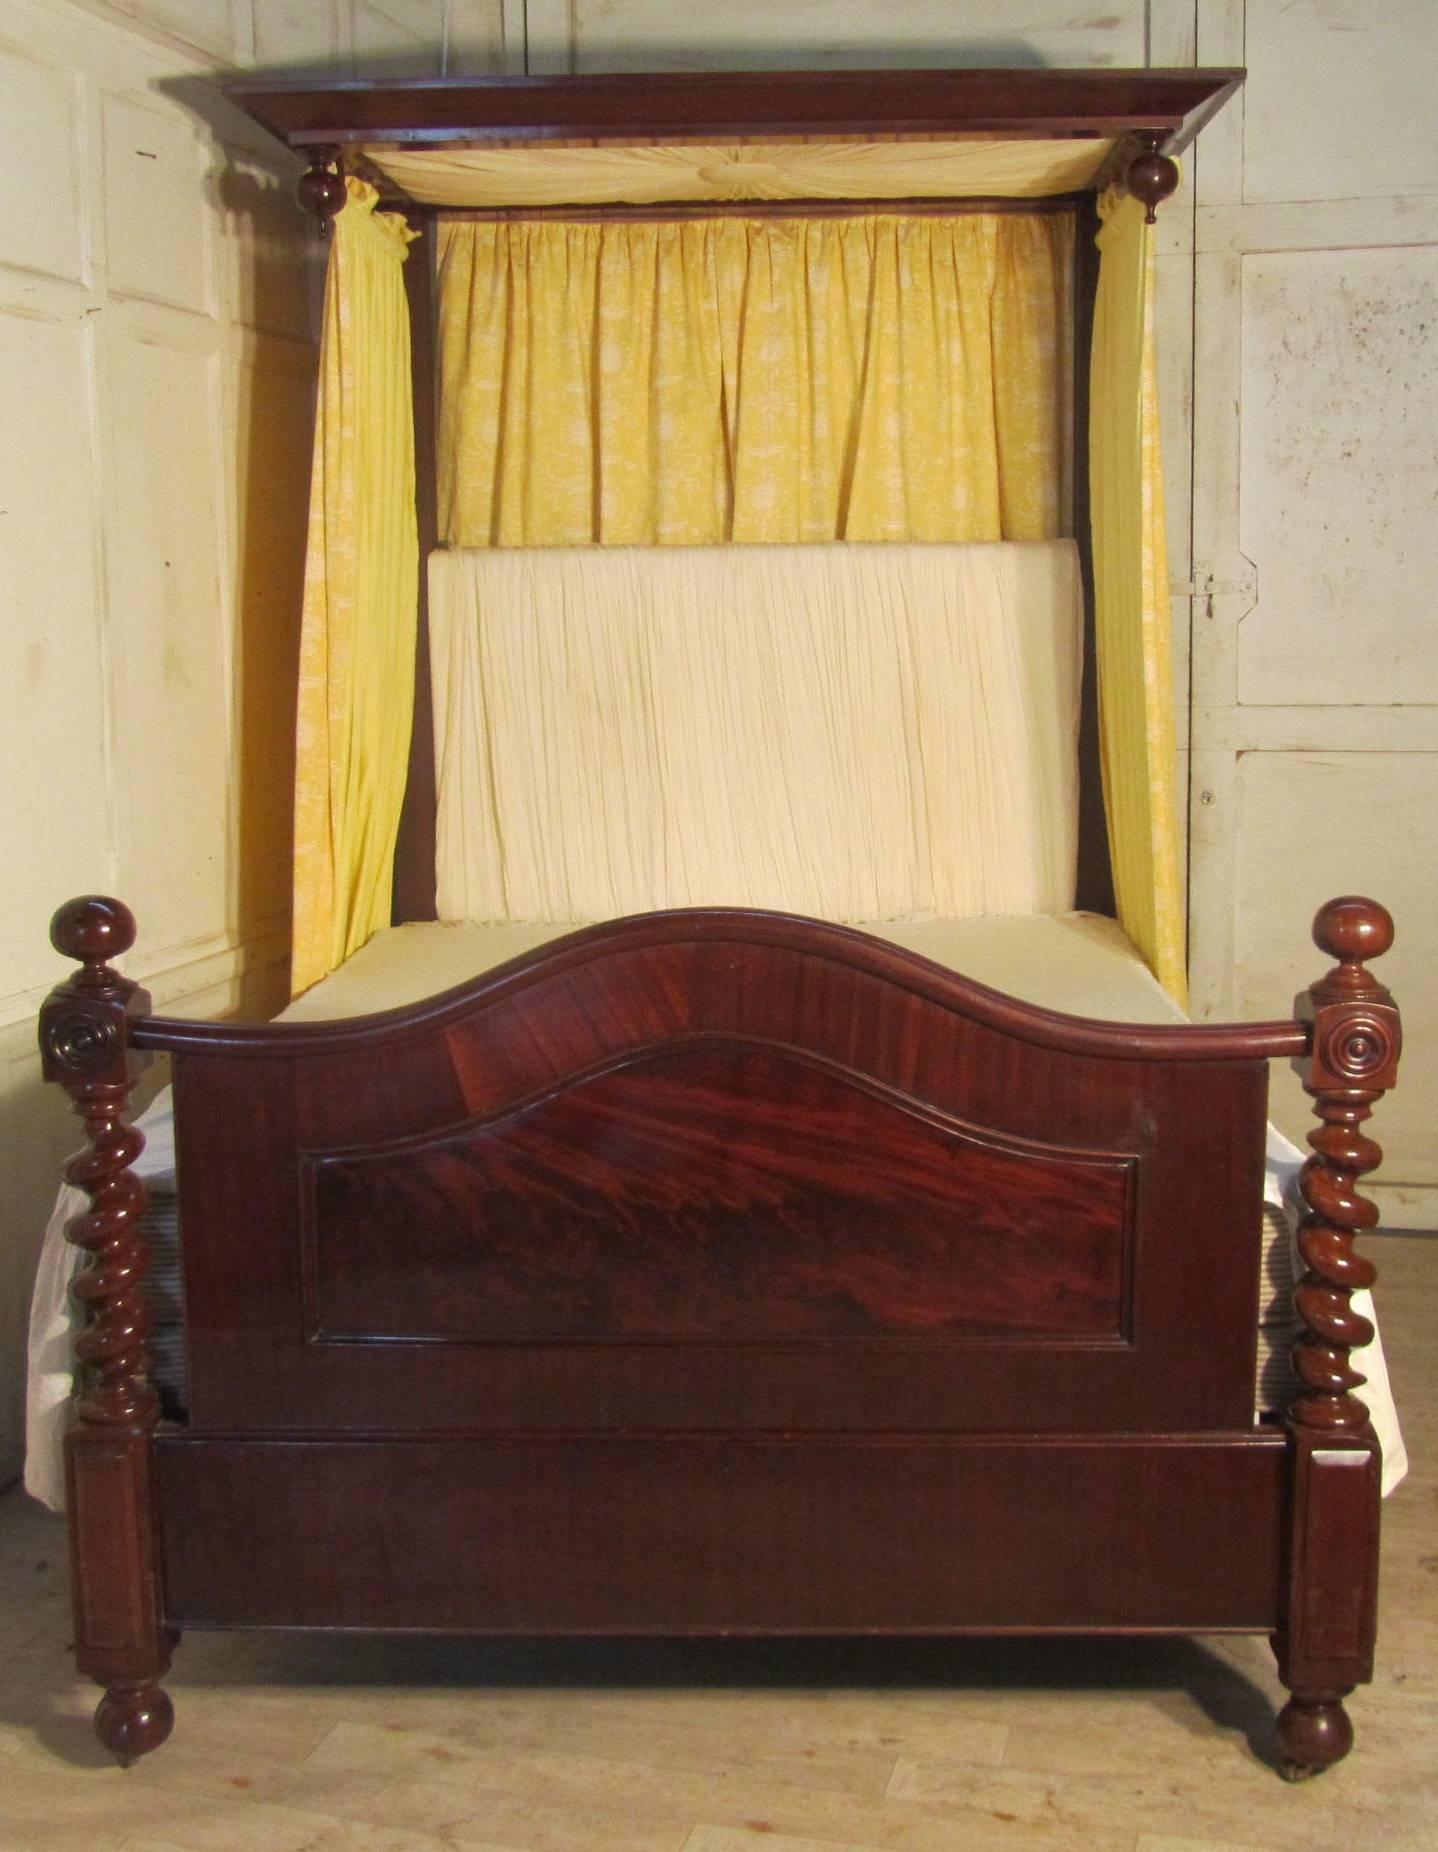 This Victorian mahogany half tester bed is superb, it dates from around 1860 it has a half canopy over the head end, this has a sunburst fabric panel inset, with large hanging teardrop turnings to the front.

The foot board of the bed is made in